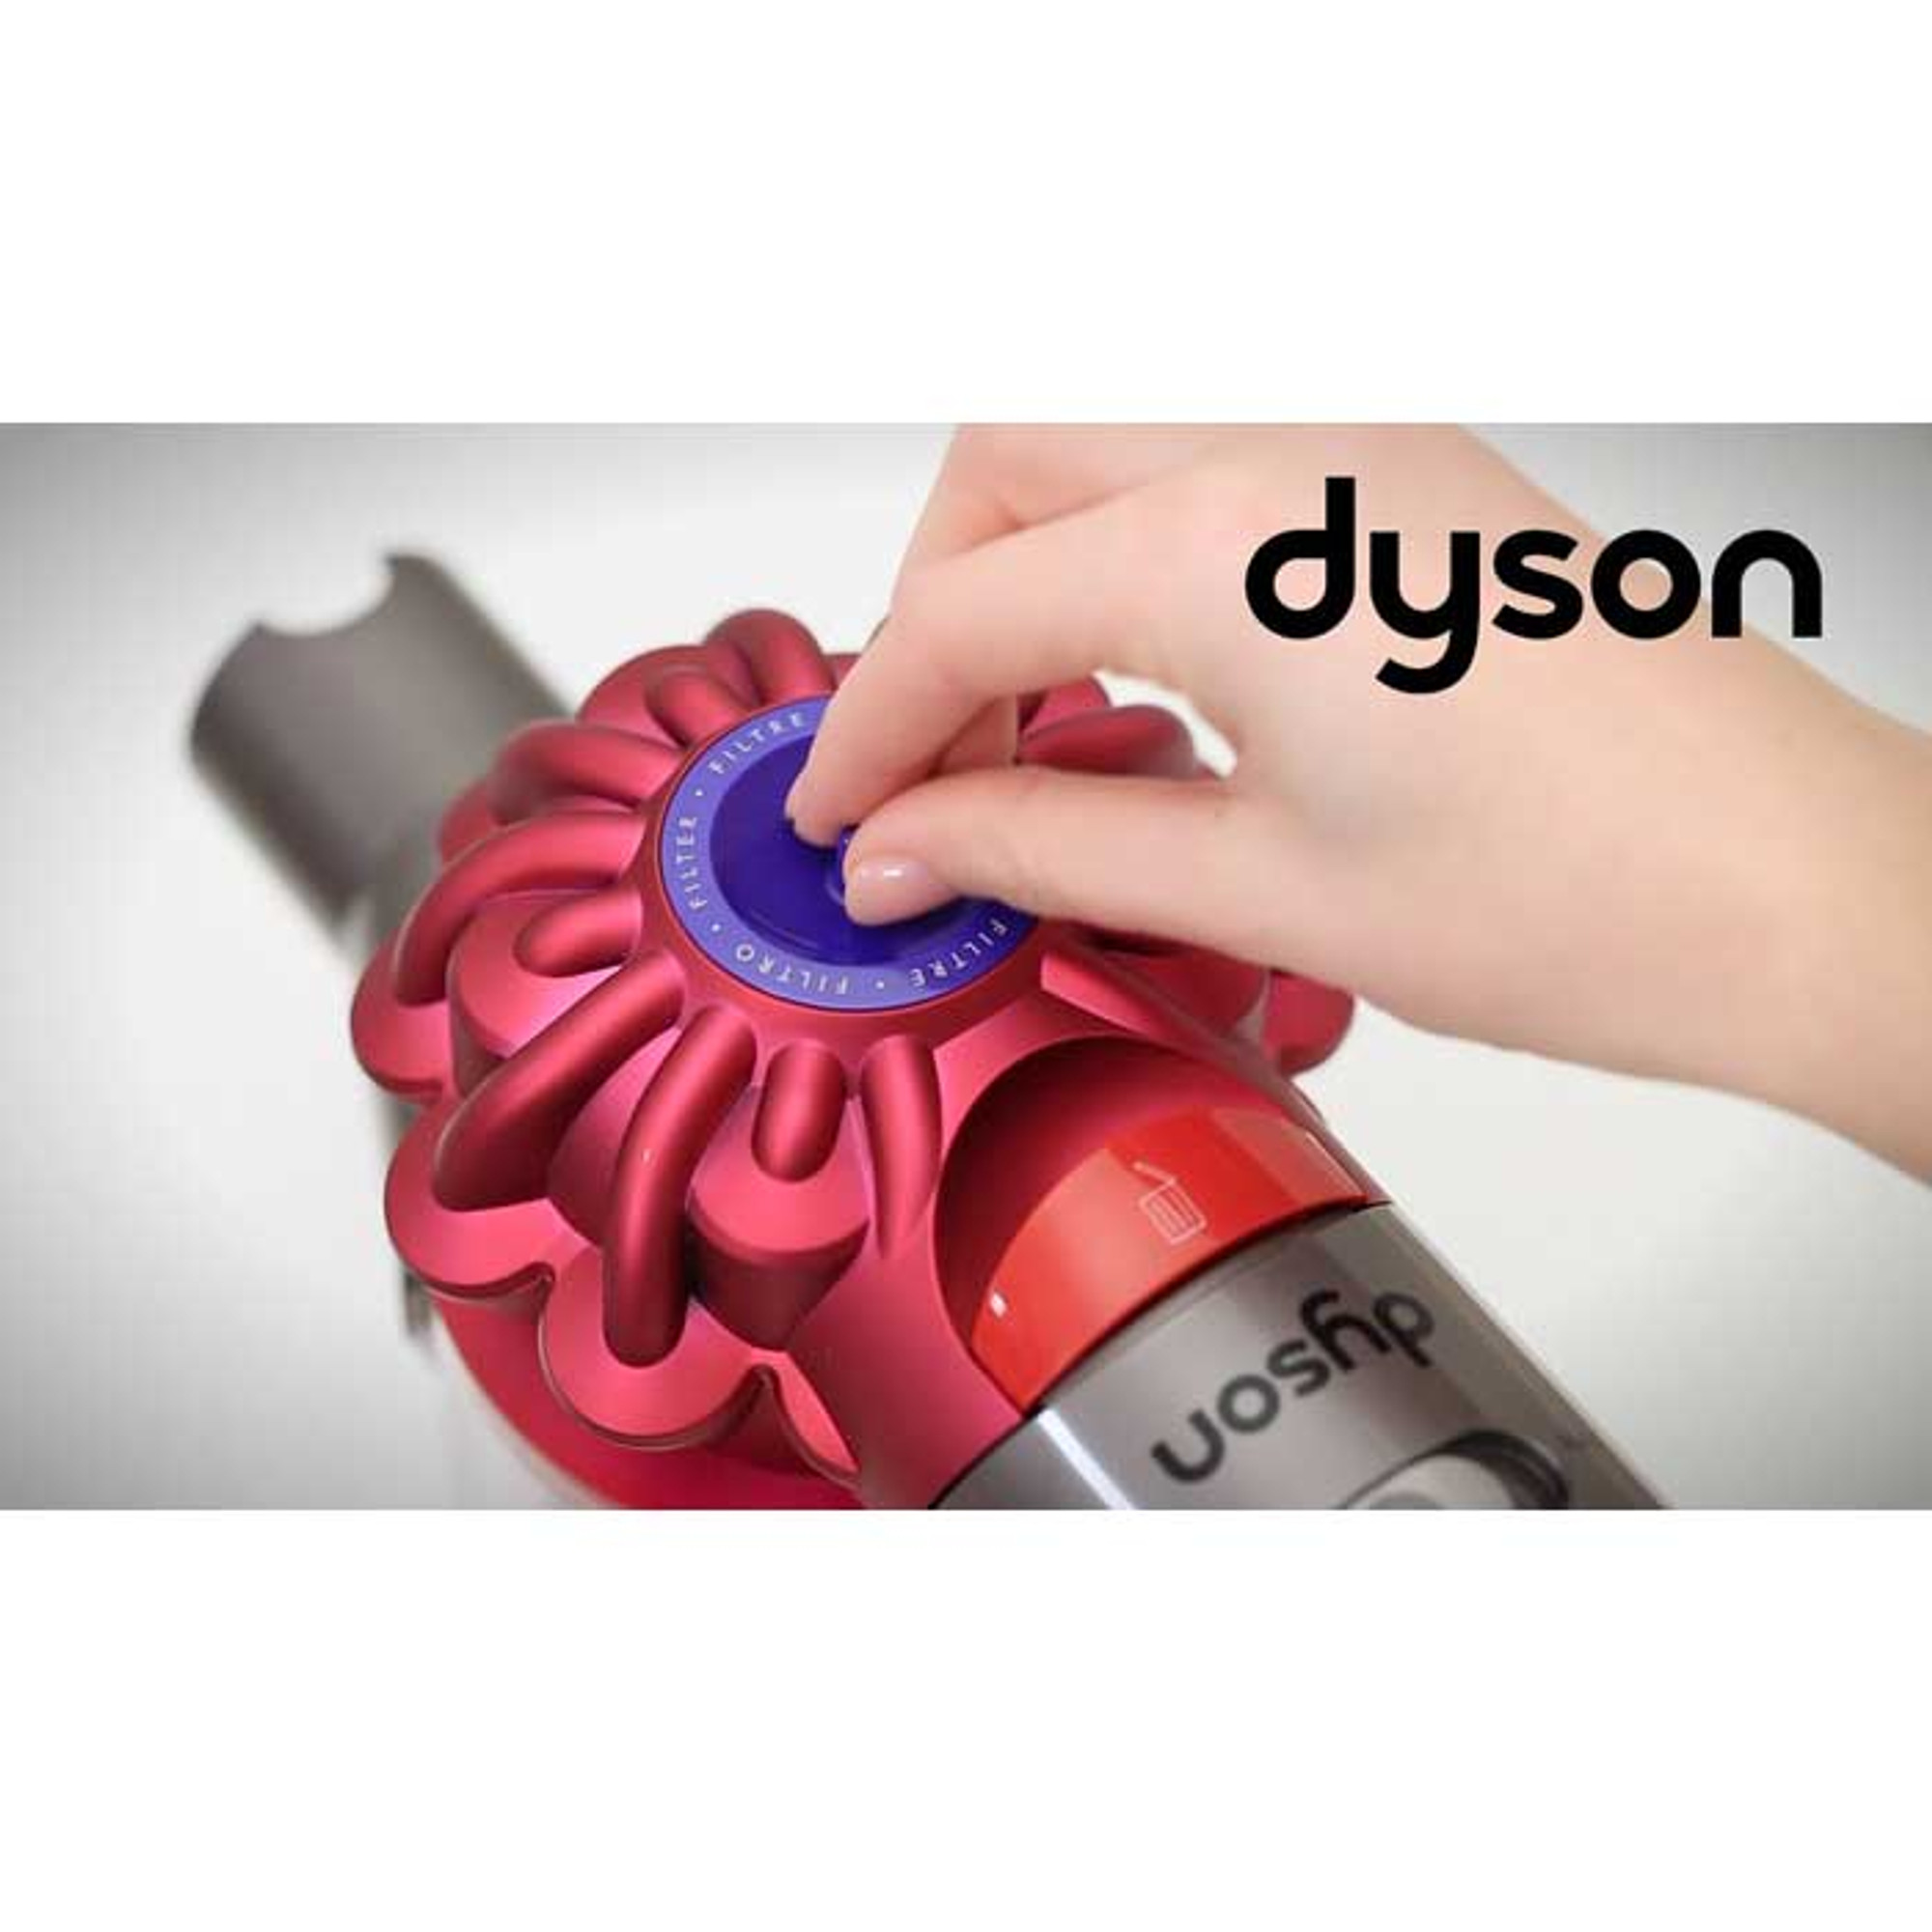 Buy Dyson V7 and V8 Cordless Vacuum Filter Kit from Canada at